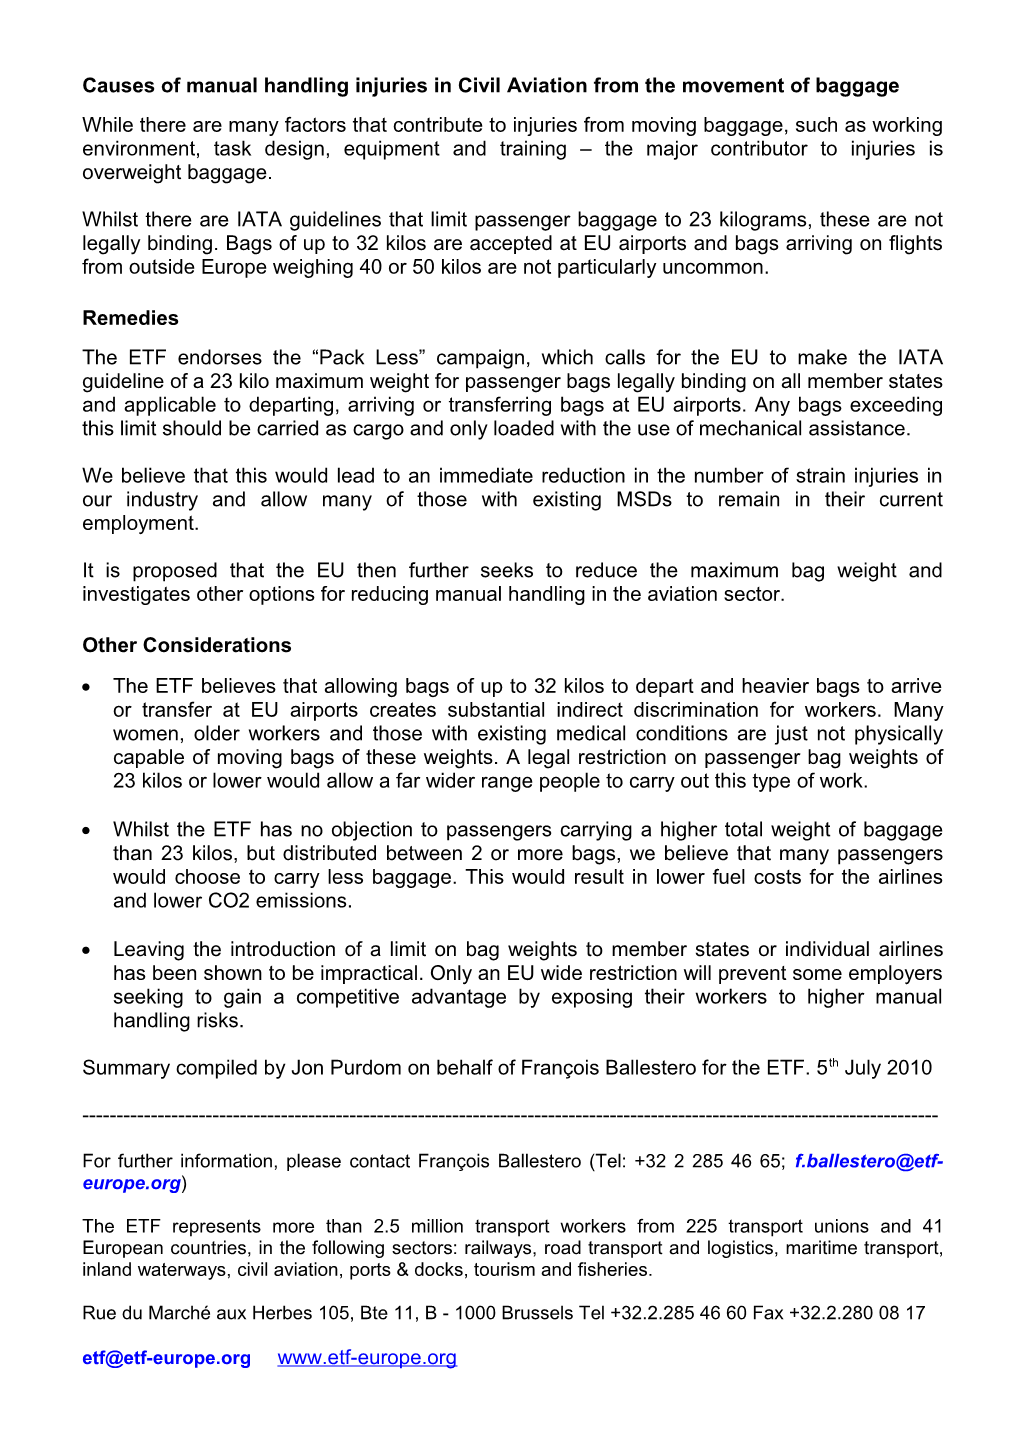 ETF Position Statement on Manual Handling Injuries in Civil Aviation